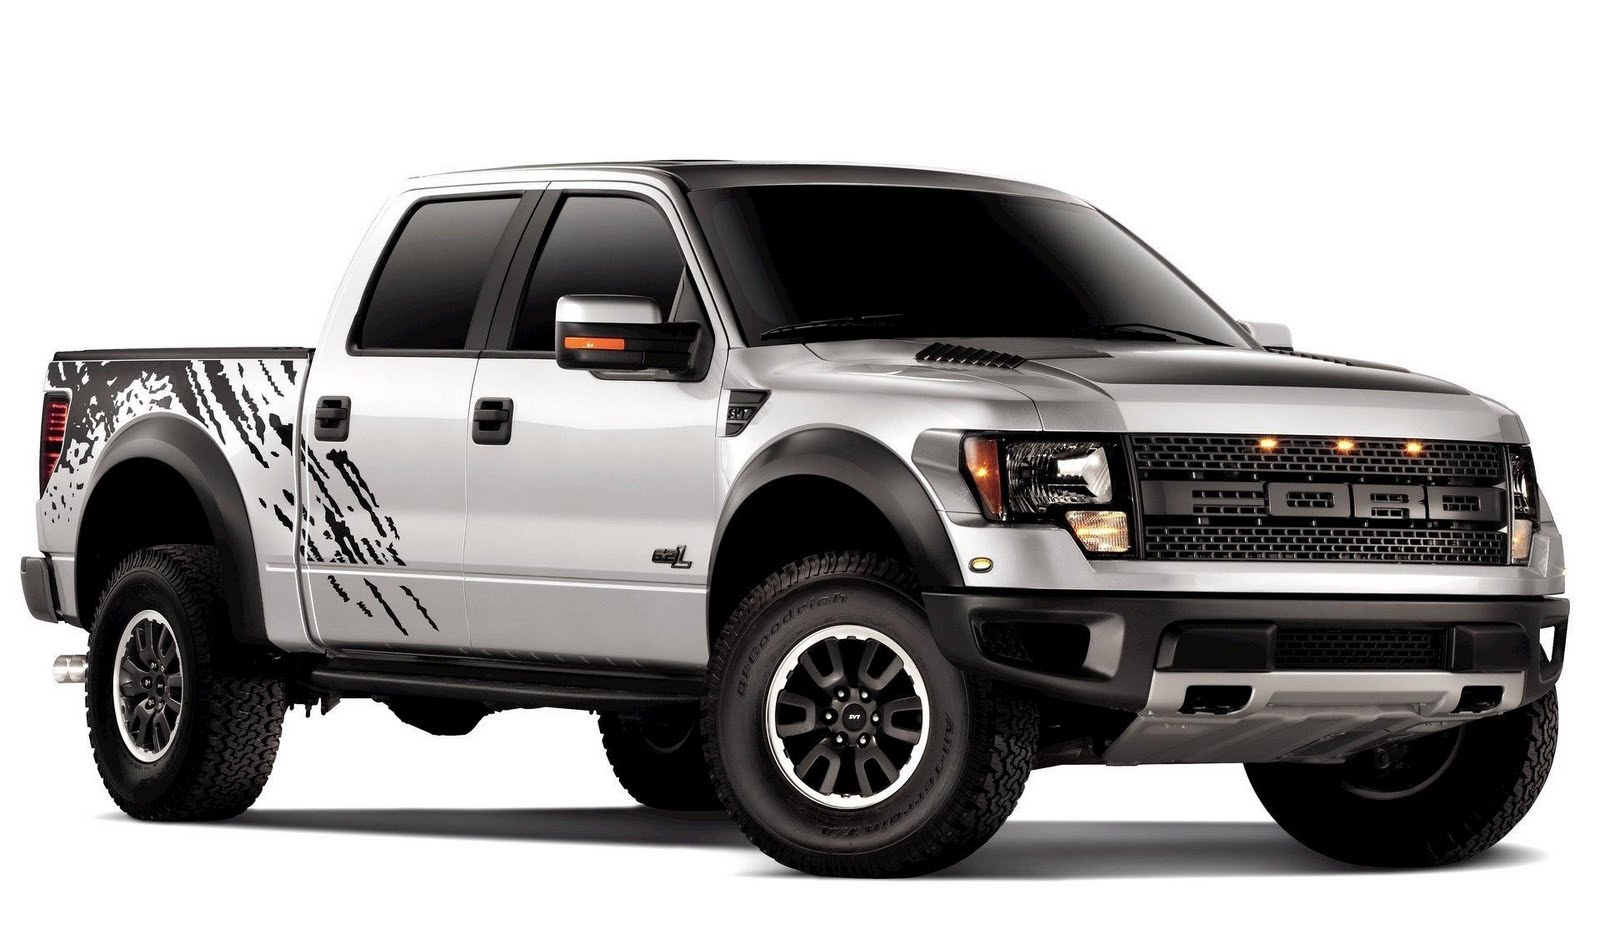 Ford Truck HD Wallpapers Ford Truck Pictures Cool Wallpapers 1600x934